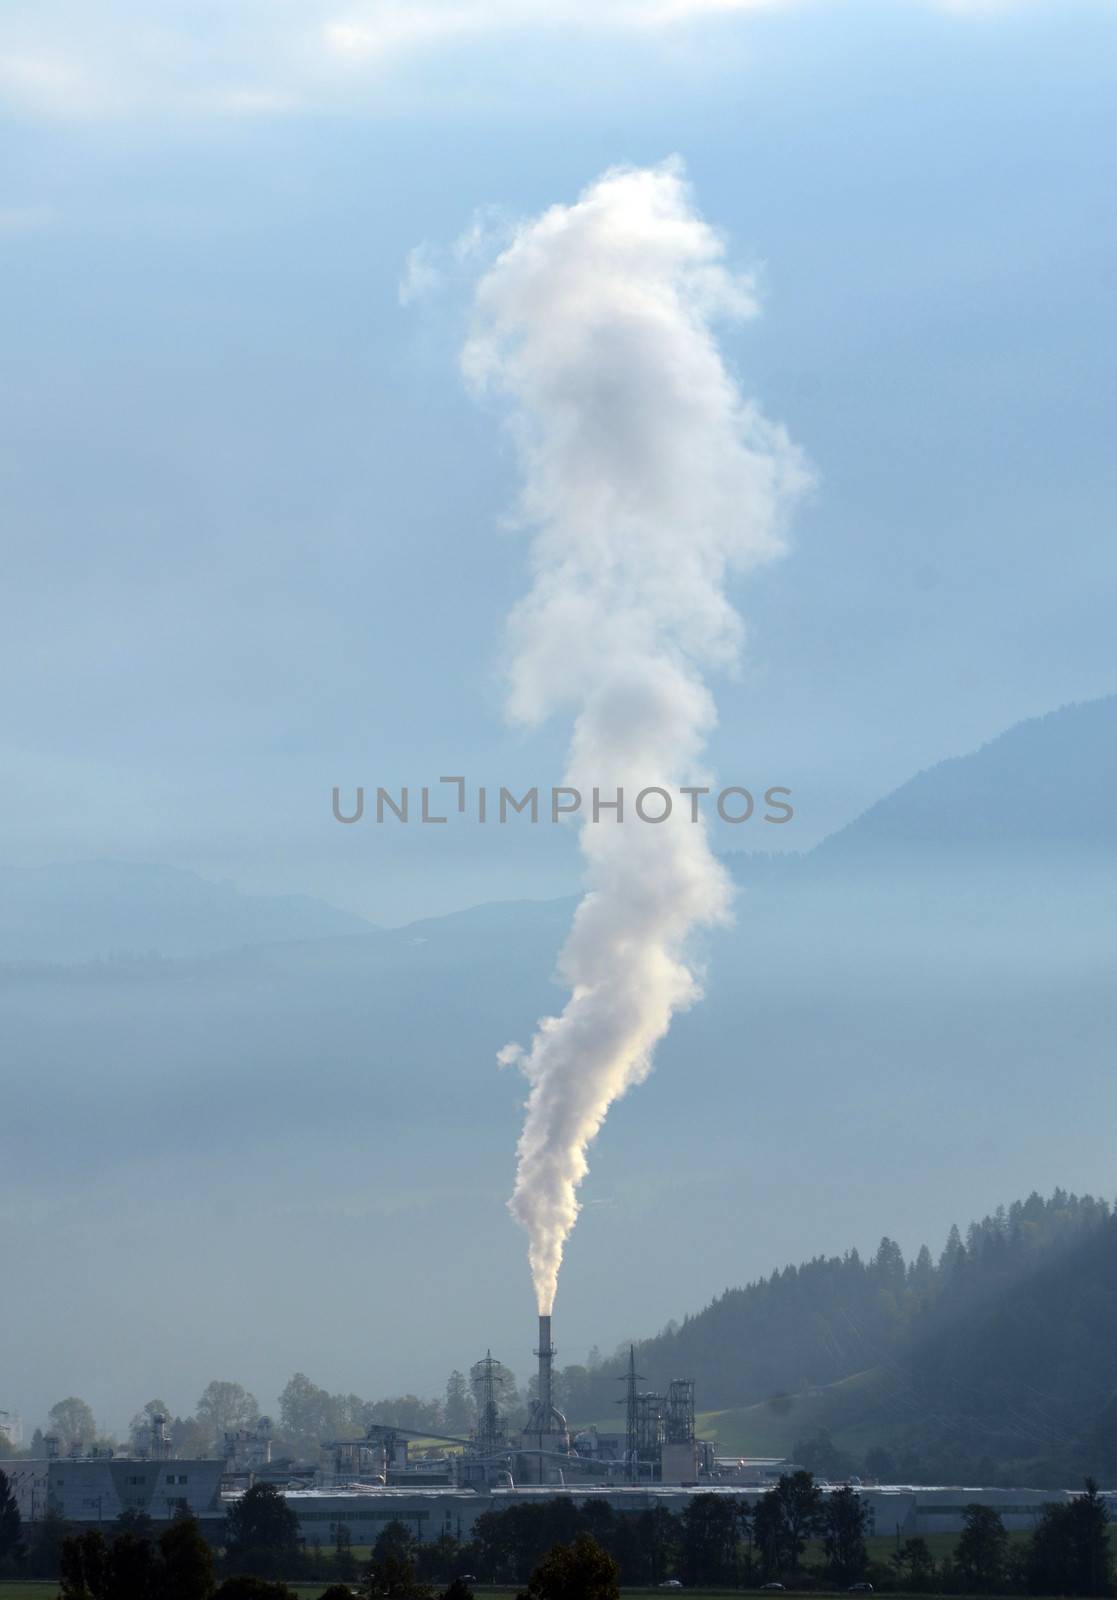 Industry Image Of Smoke Pollution From A Factory Or Power Station Chimney